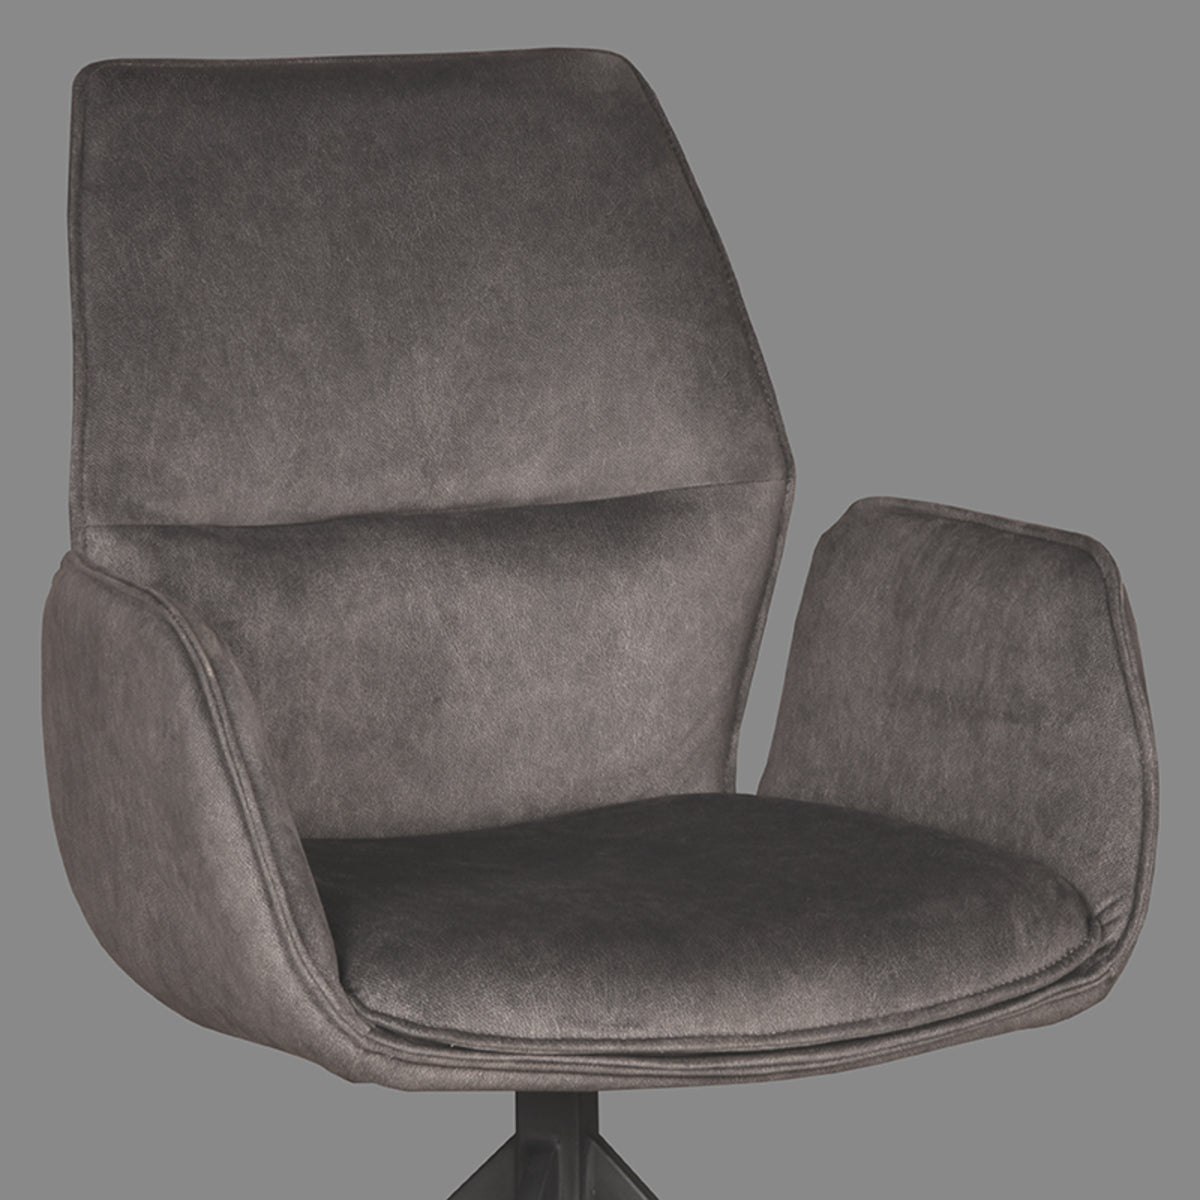 LABEL51 Dining room chair Mellow - Anthracite - Cosmo